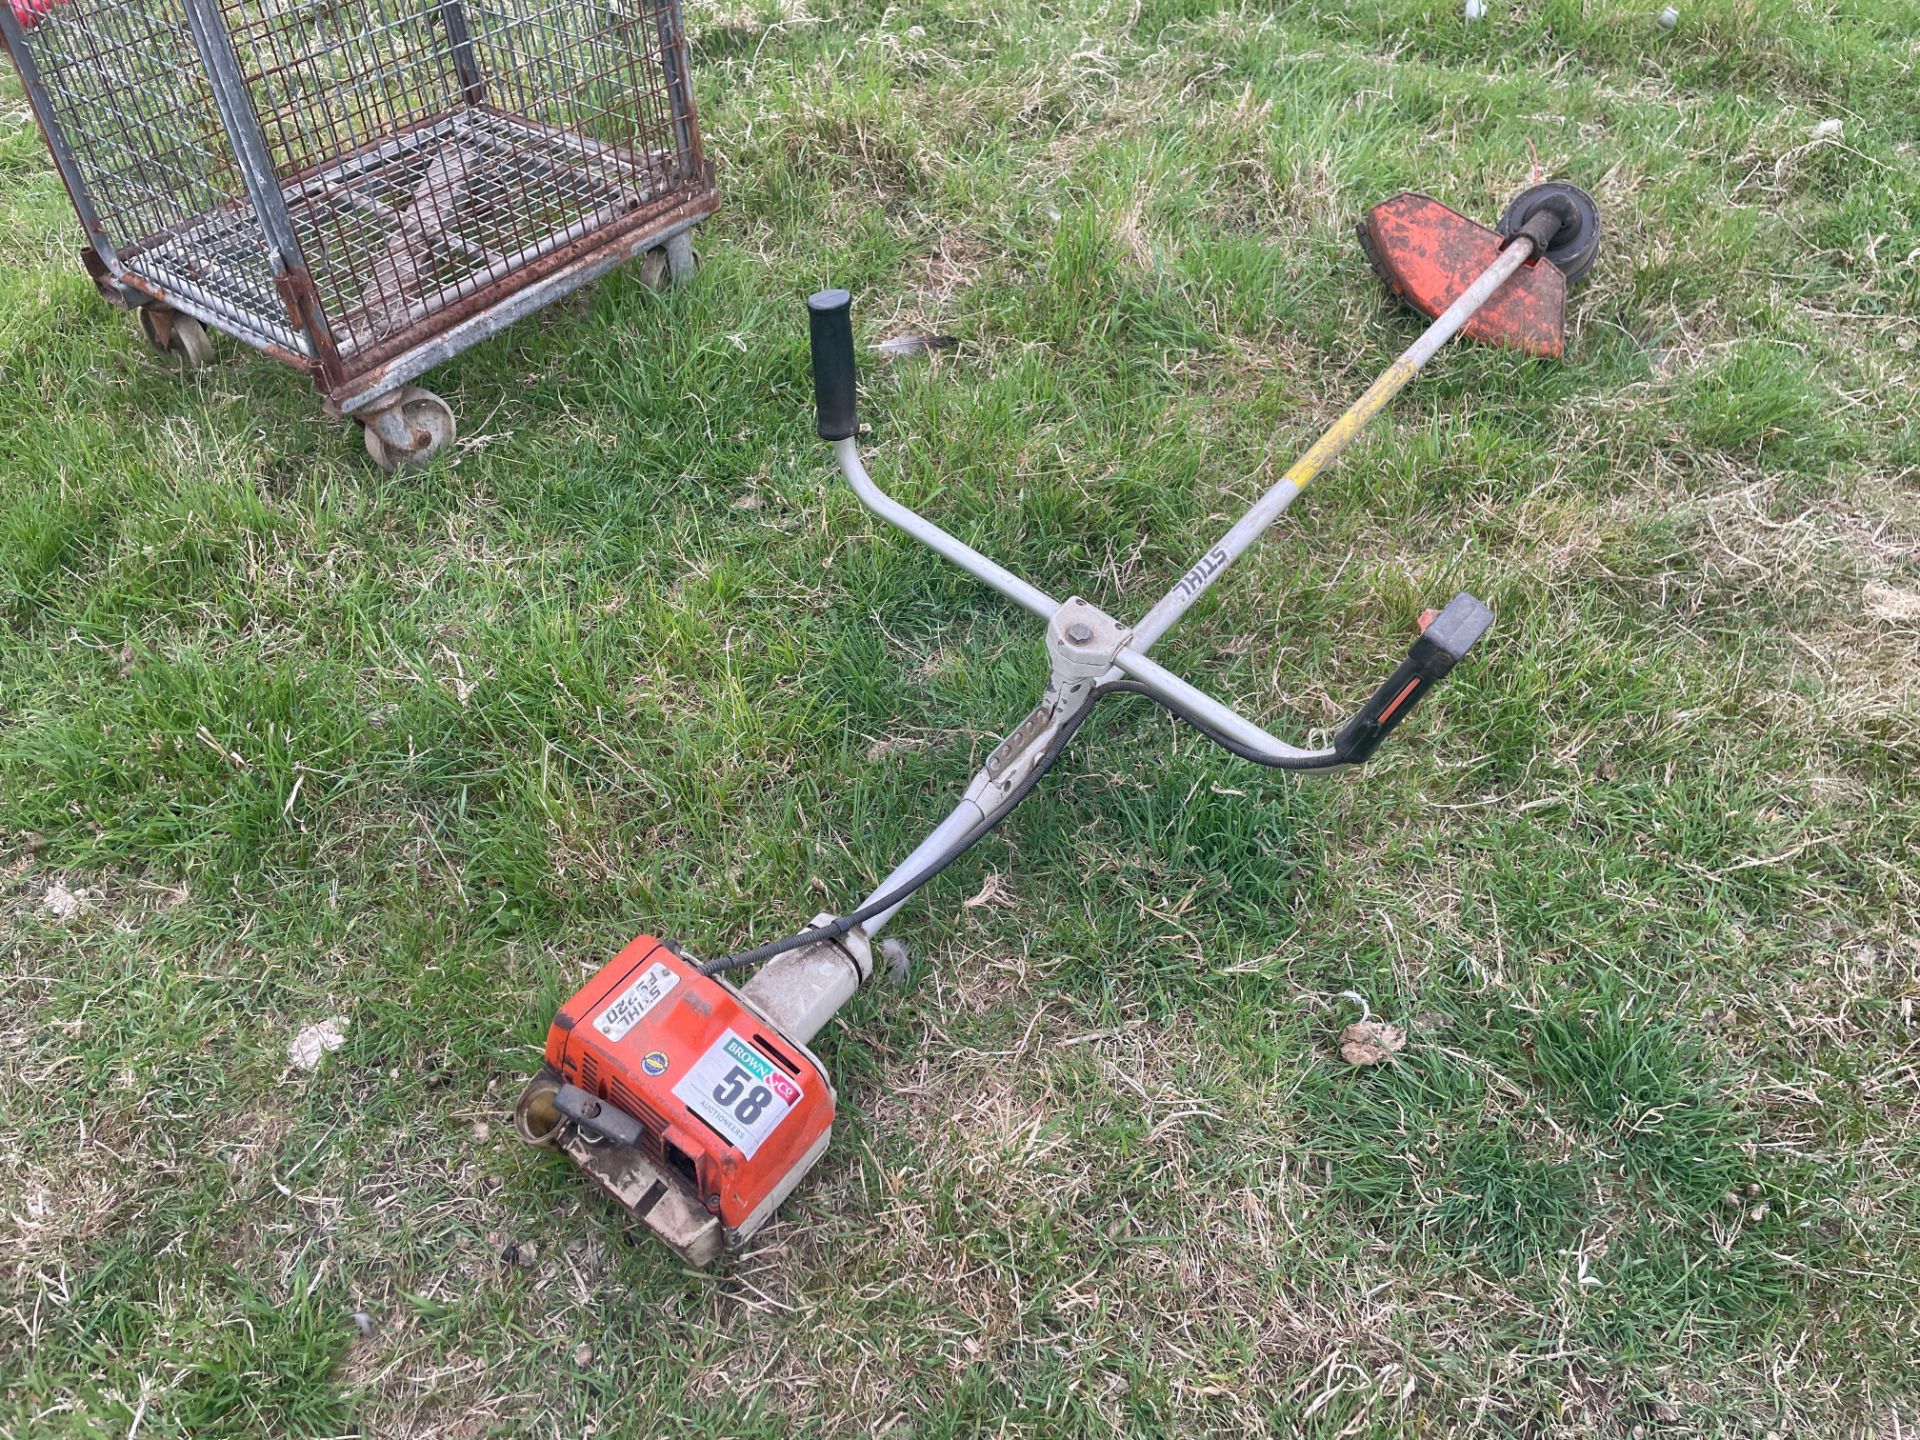 Stihl FS220 strimmer, spares or repairs